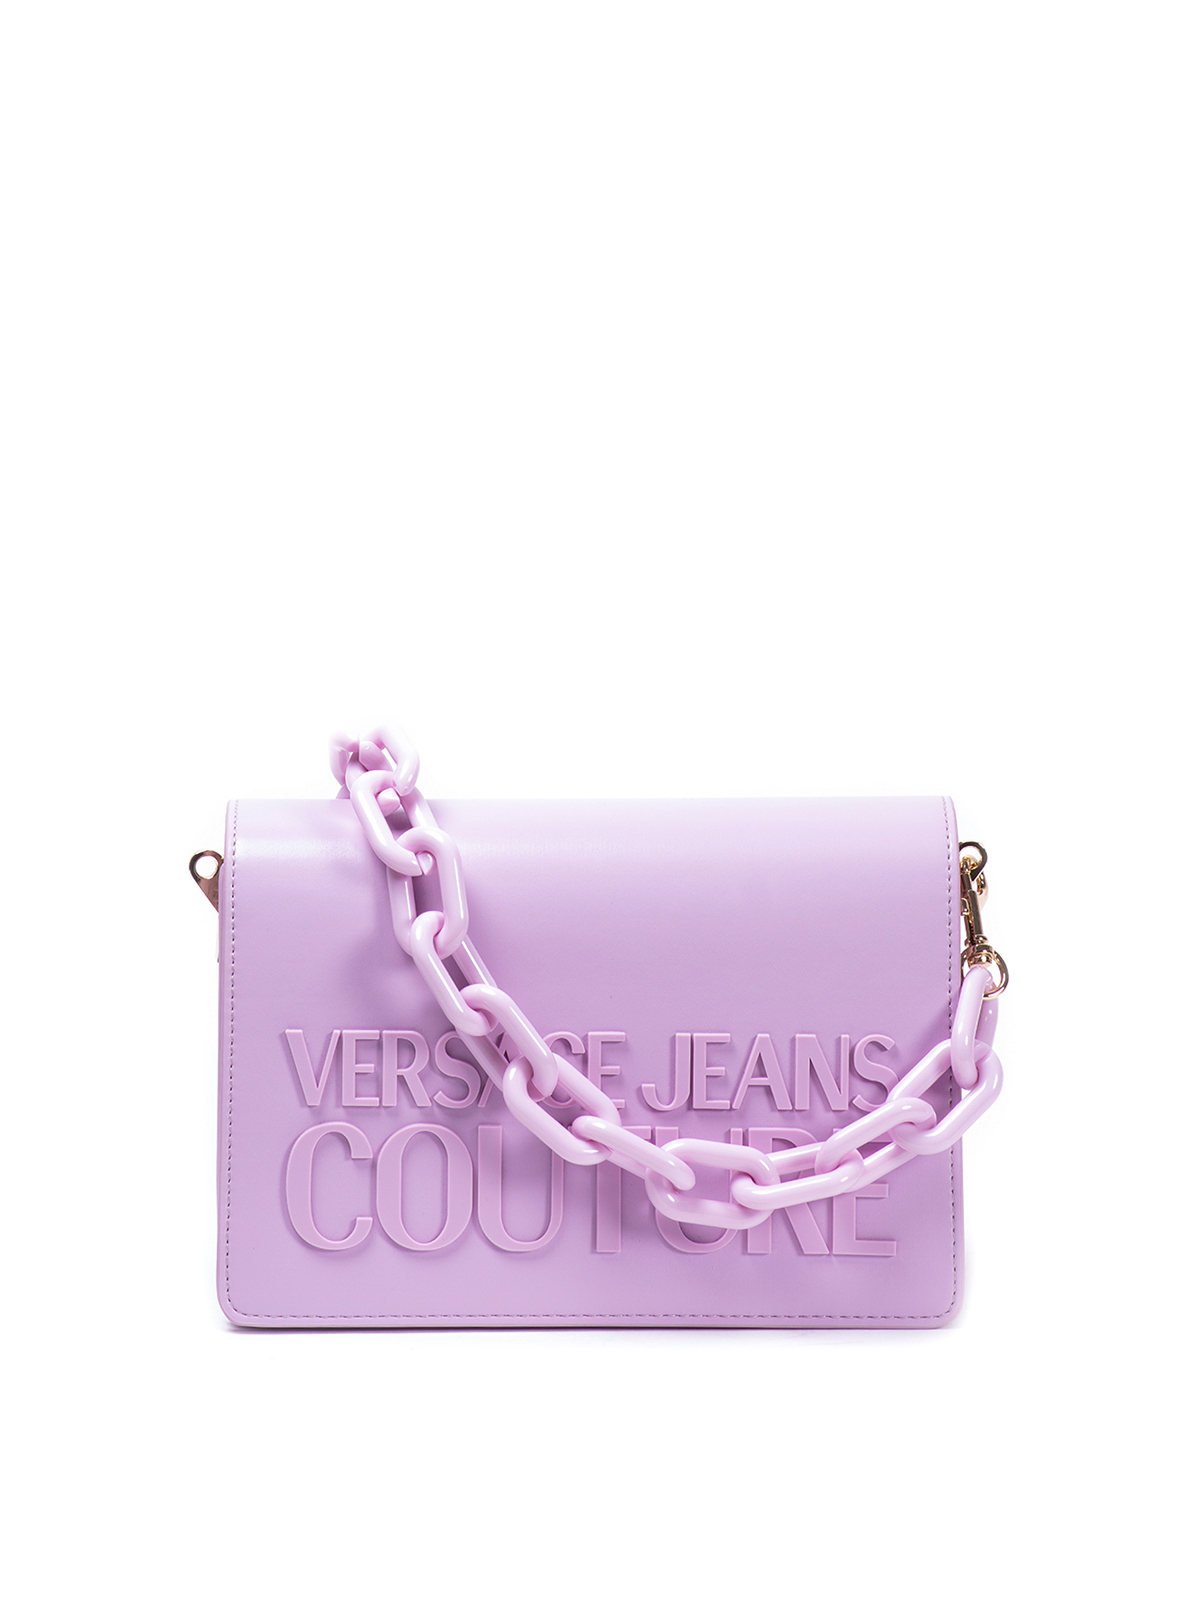 Versace Jeans Couture Institutional Logo Sketch 1 Bag In Light Purple